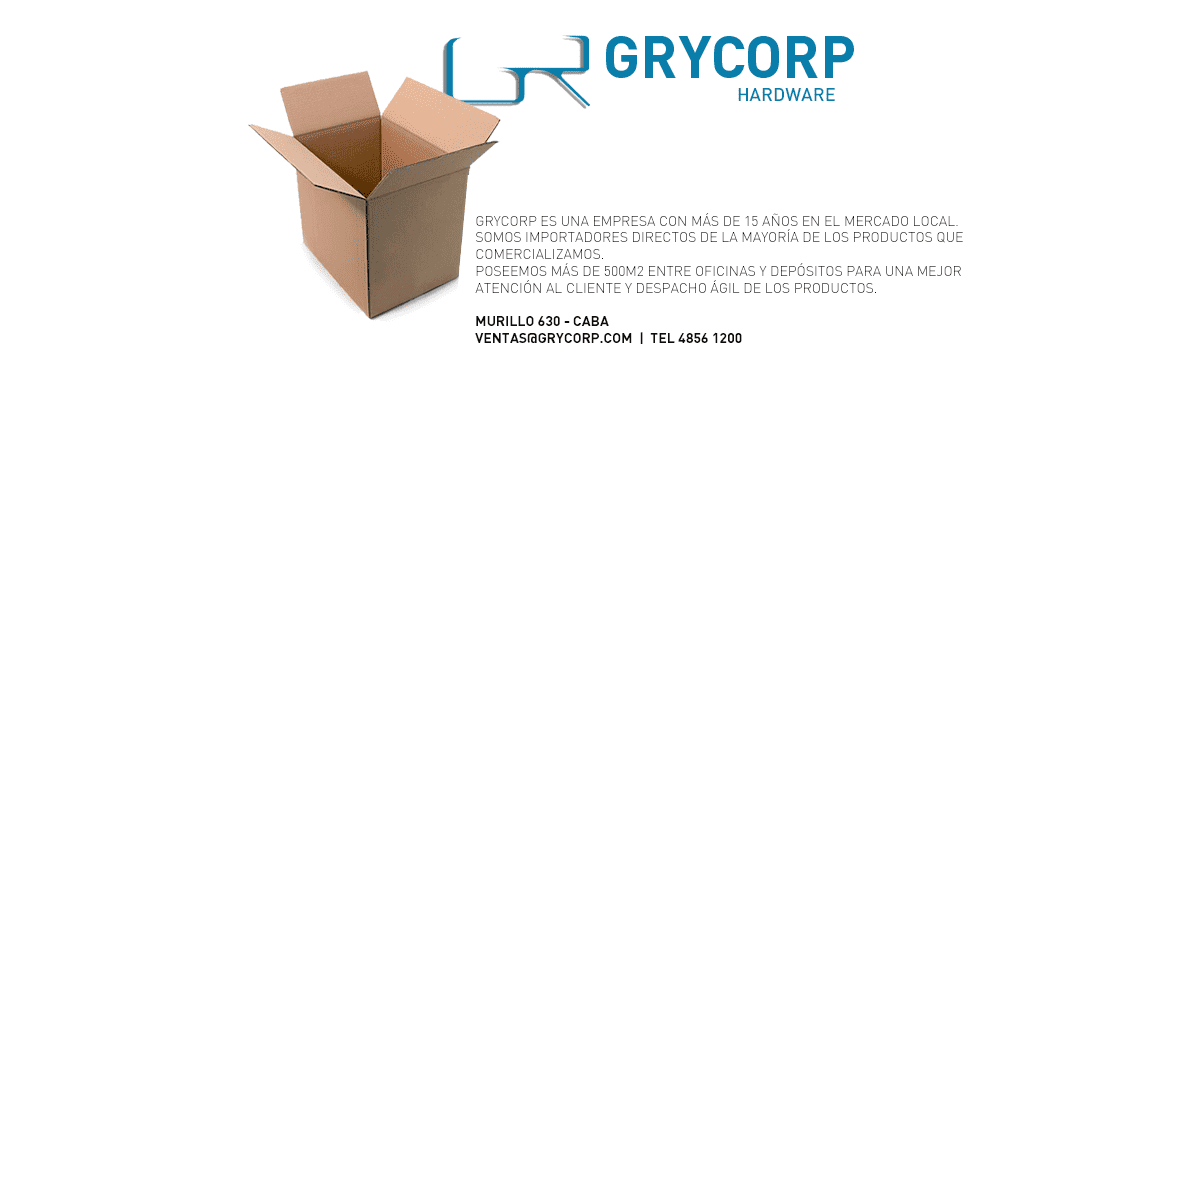 A complete backup of grycorp.com